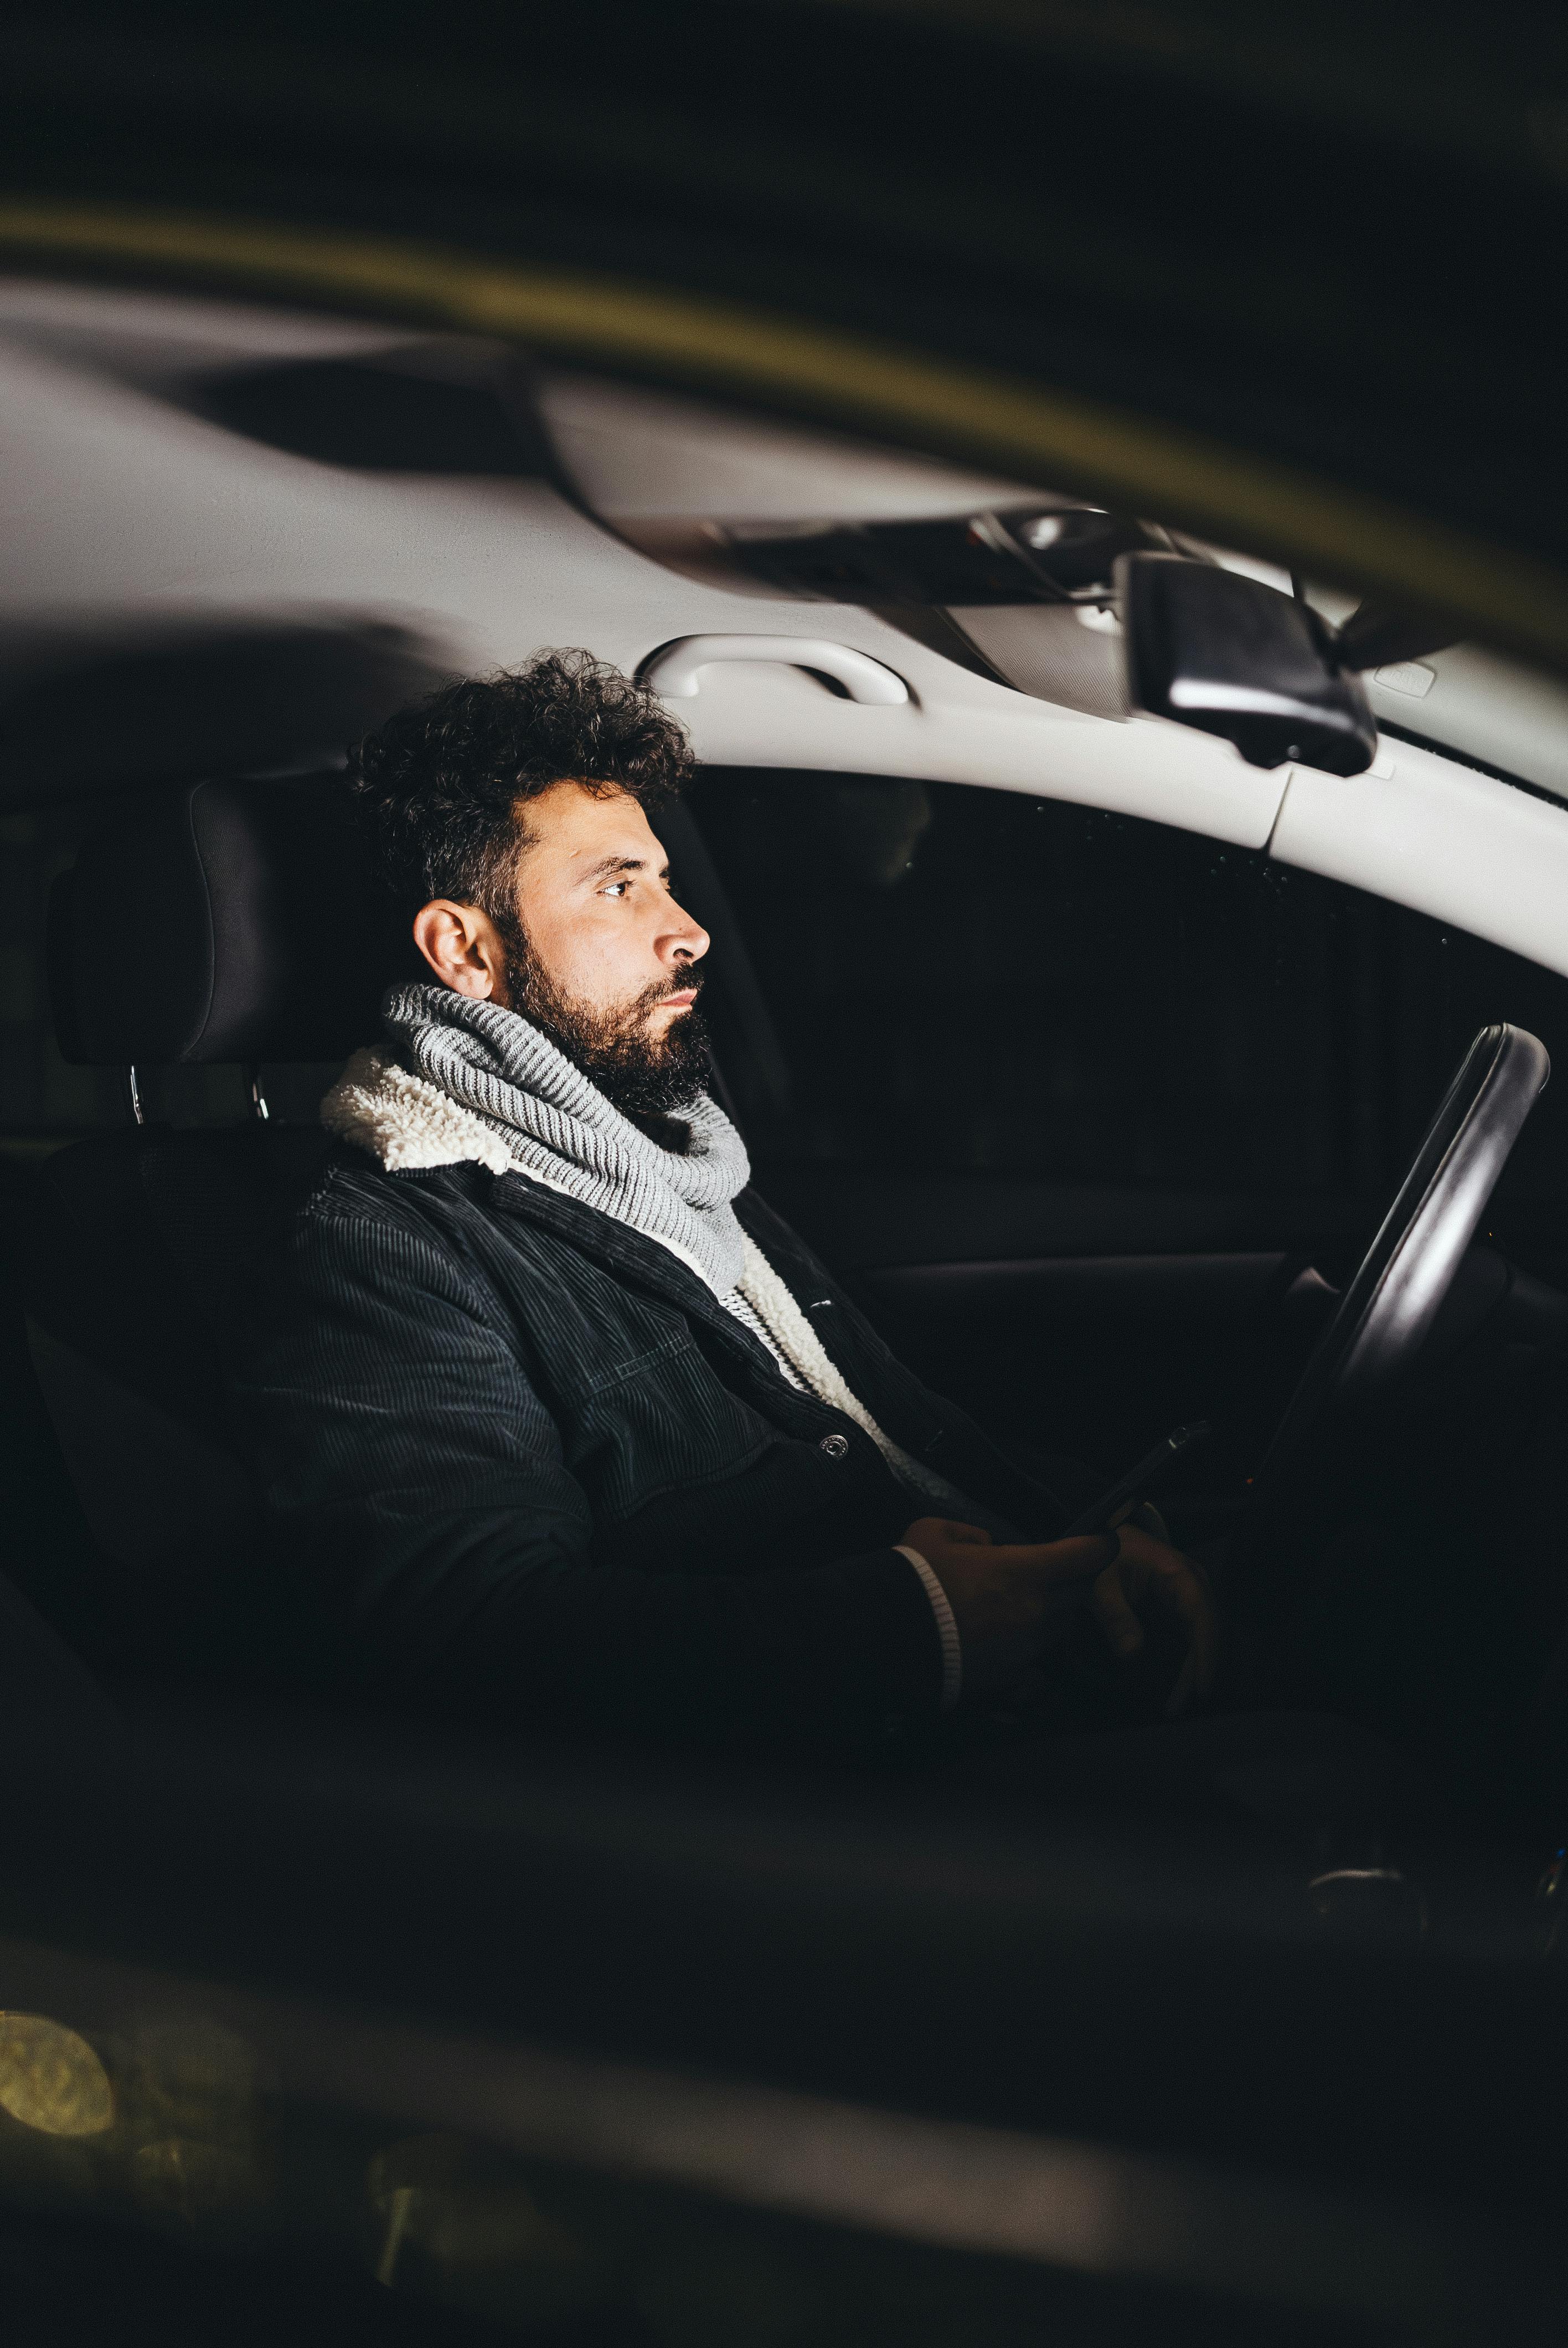 A man driving home alone | Source: Pexels